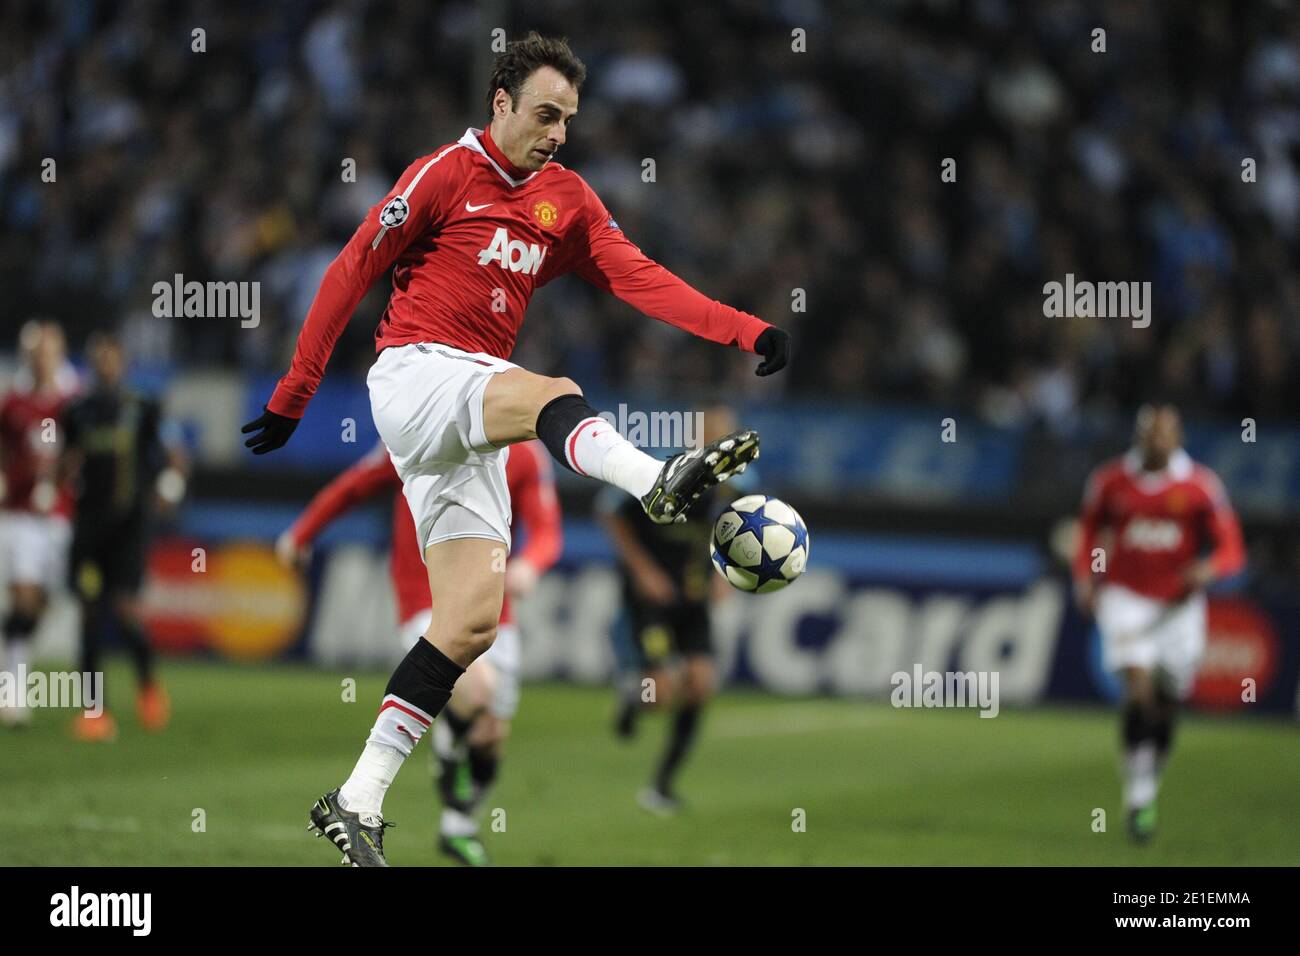 Manchester United's Dimitar Berbatov during the Champion's League 1/8 of final soccer match, Marseille vs Manchester United, in Marseille, France, on February 23th, 2011. Manchester United and Marseille drew 0-0. Photo by Henri Szwarc/ABACAPRESS.COM Stock Photo